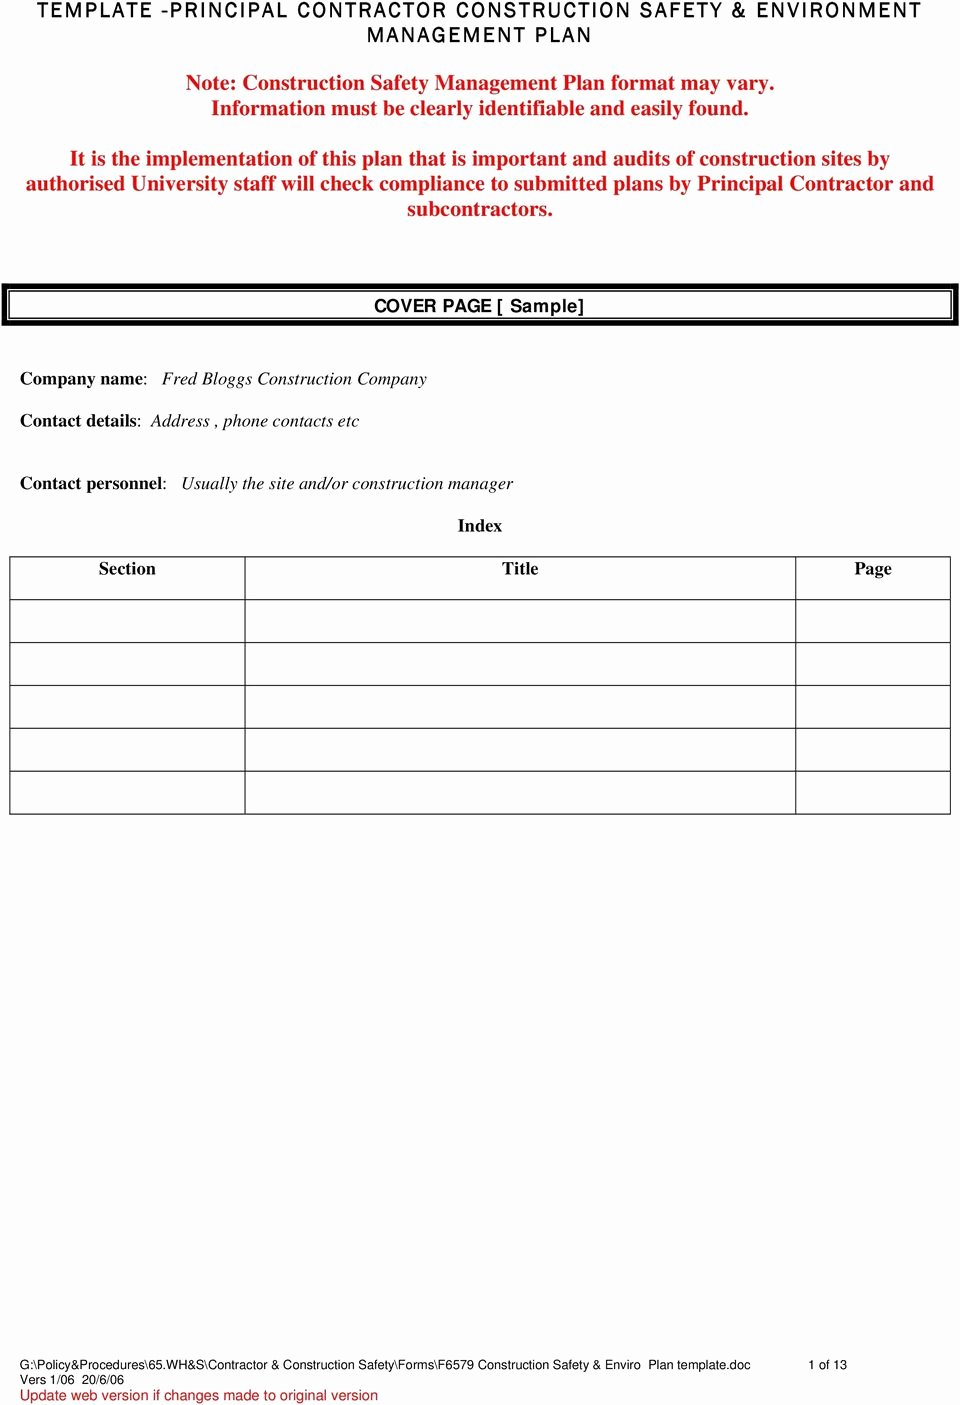 Construction Safety Plan Template Fresh Template Principal Contractor Construction Safety